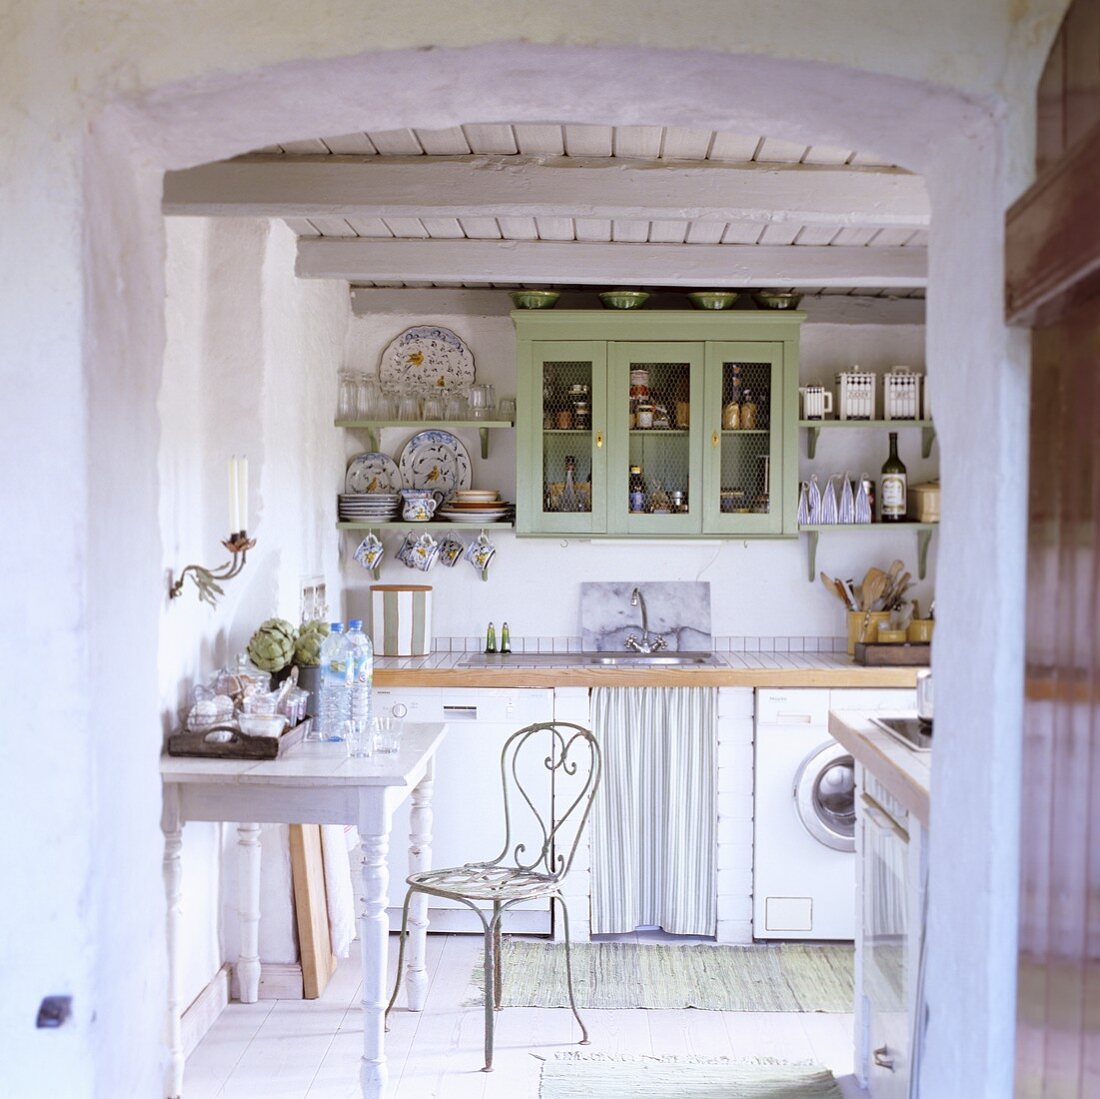 A kitchen in a 19th century German thatched-roof house decorated in a Scandinavian style